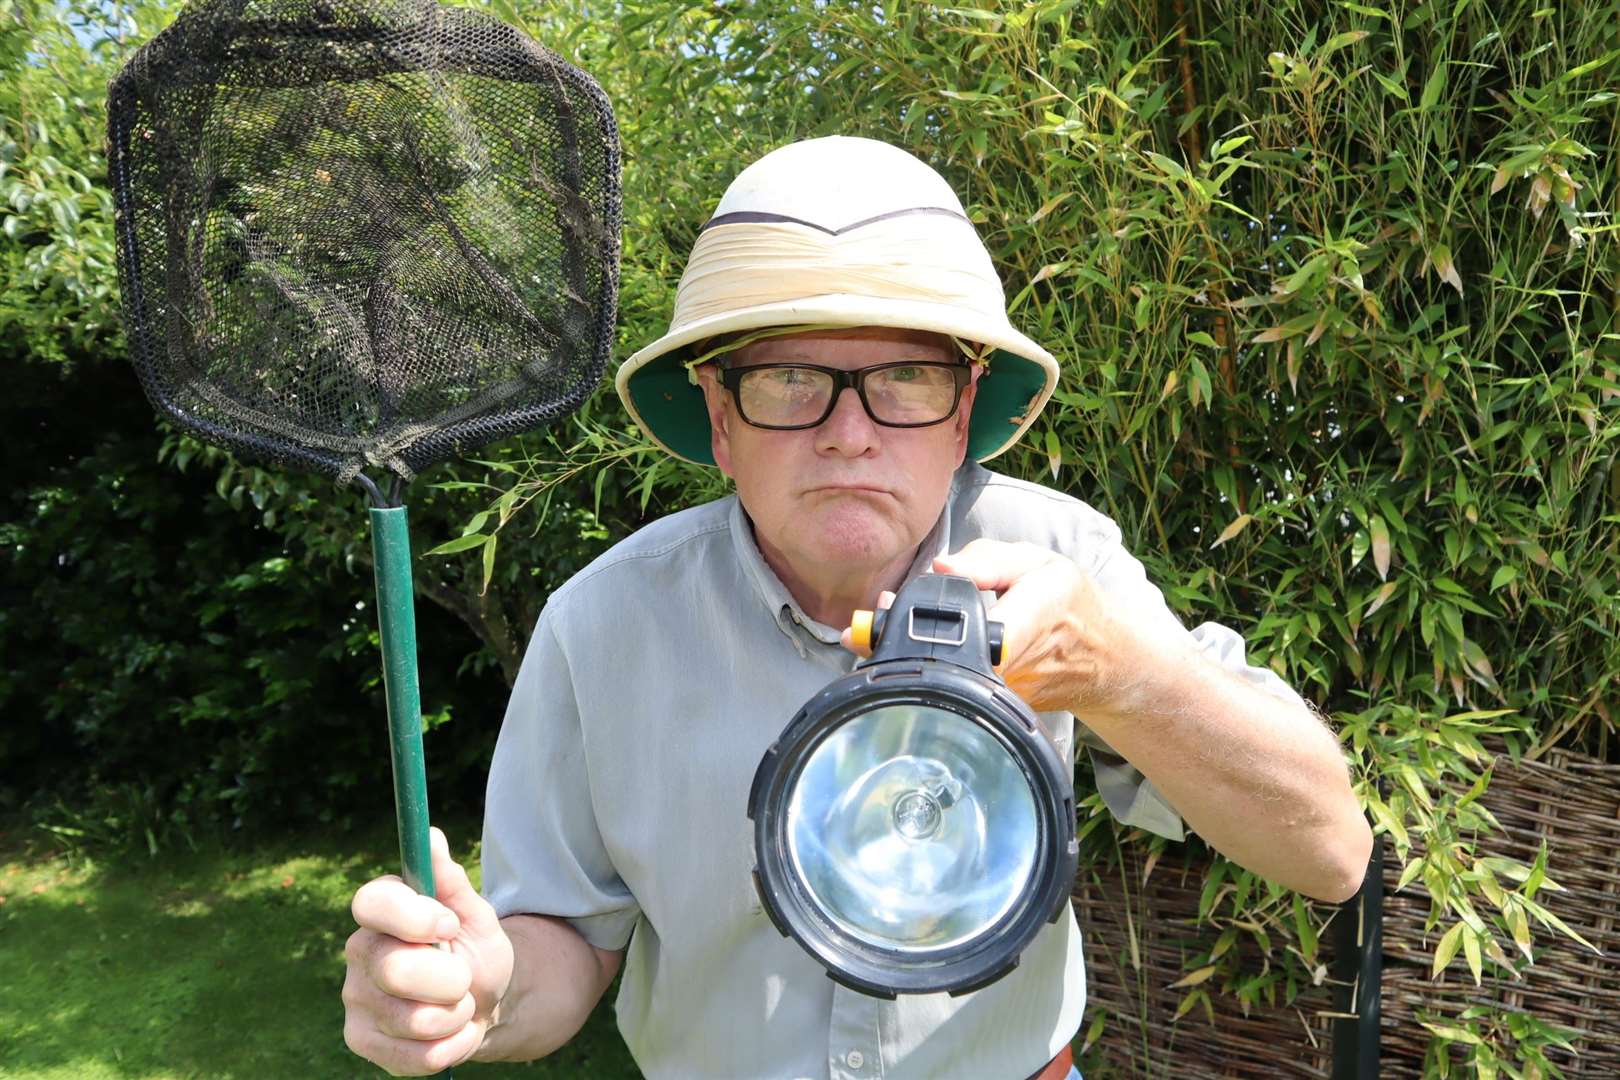 Scorpion-hunter John Nurden dons pith helmet, net and torch as he goes in search of creepy-crawlies at Blue Town